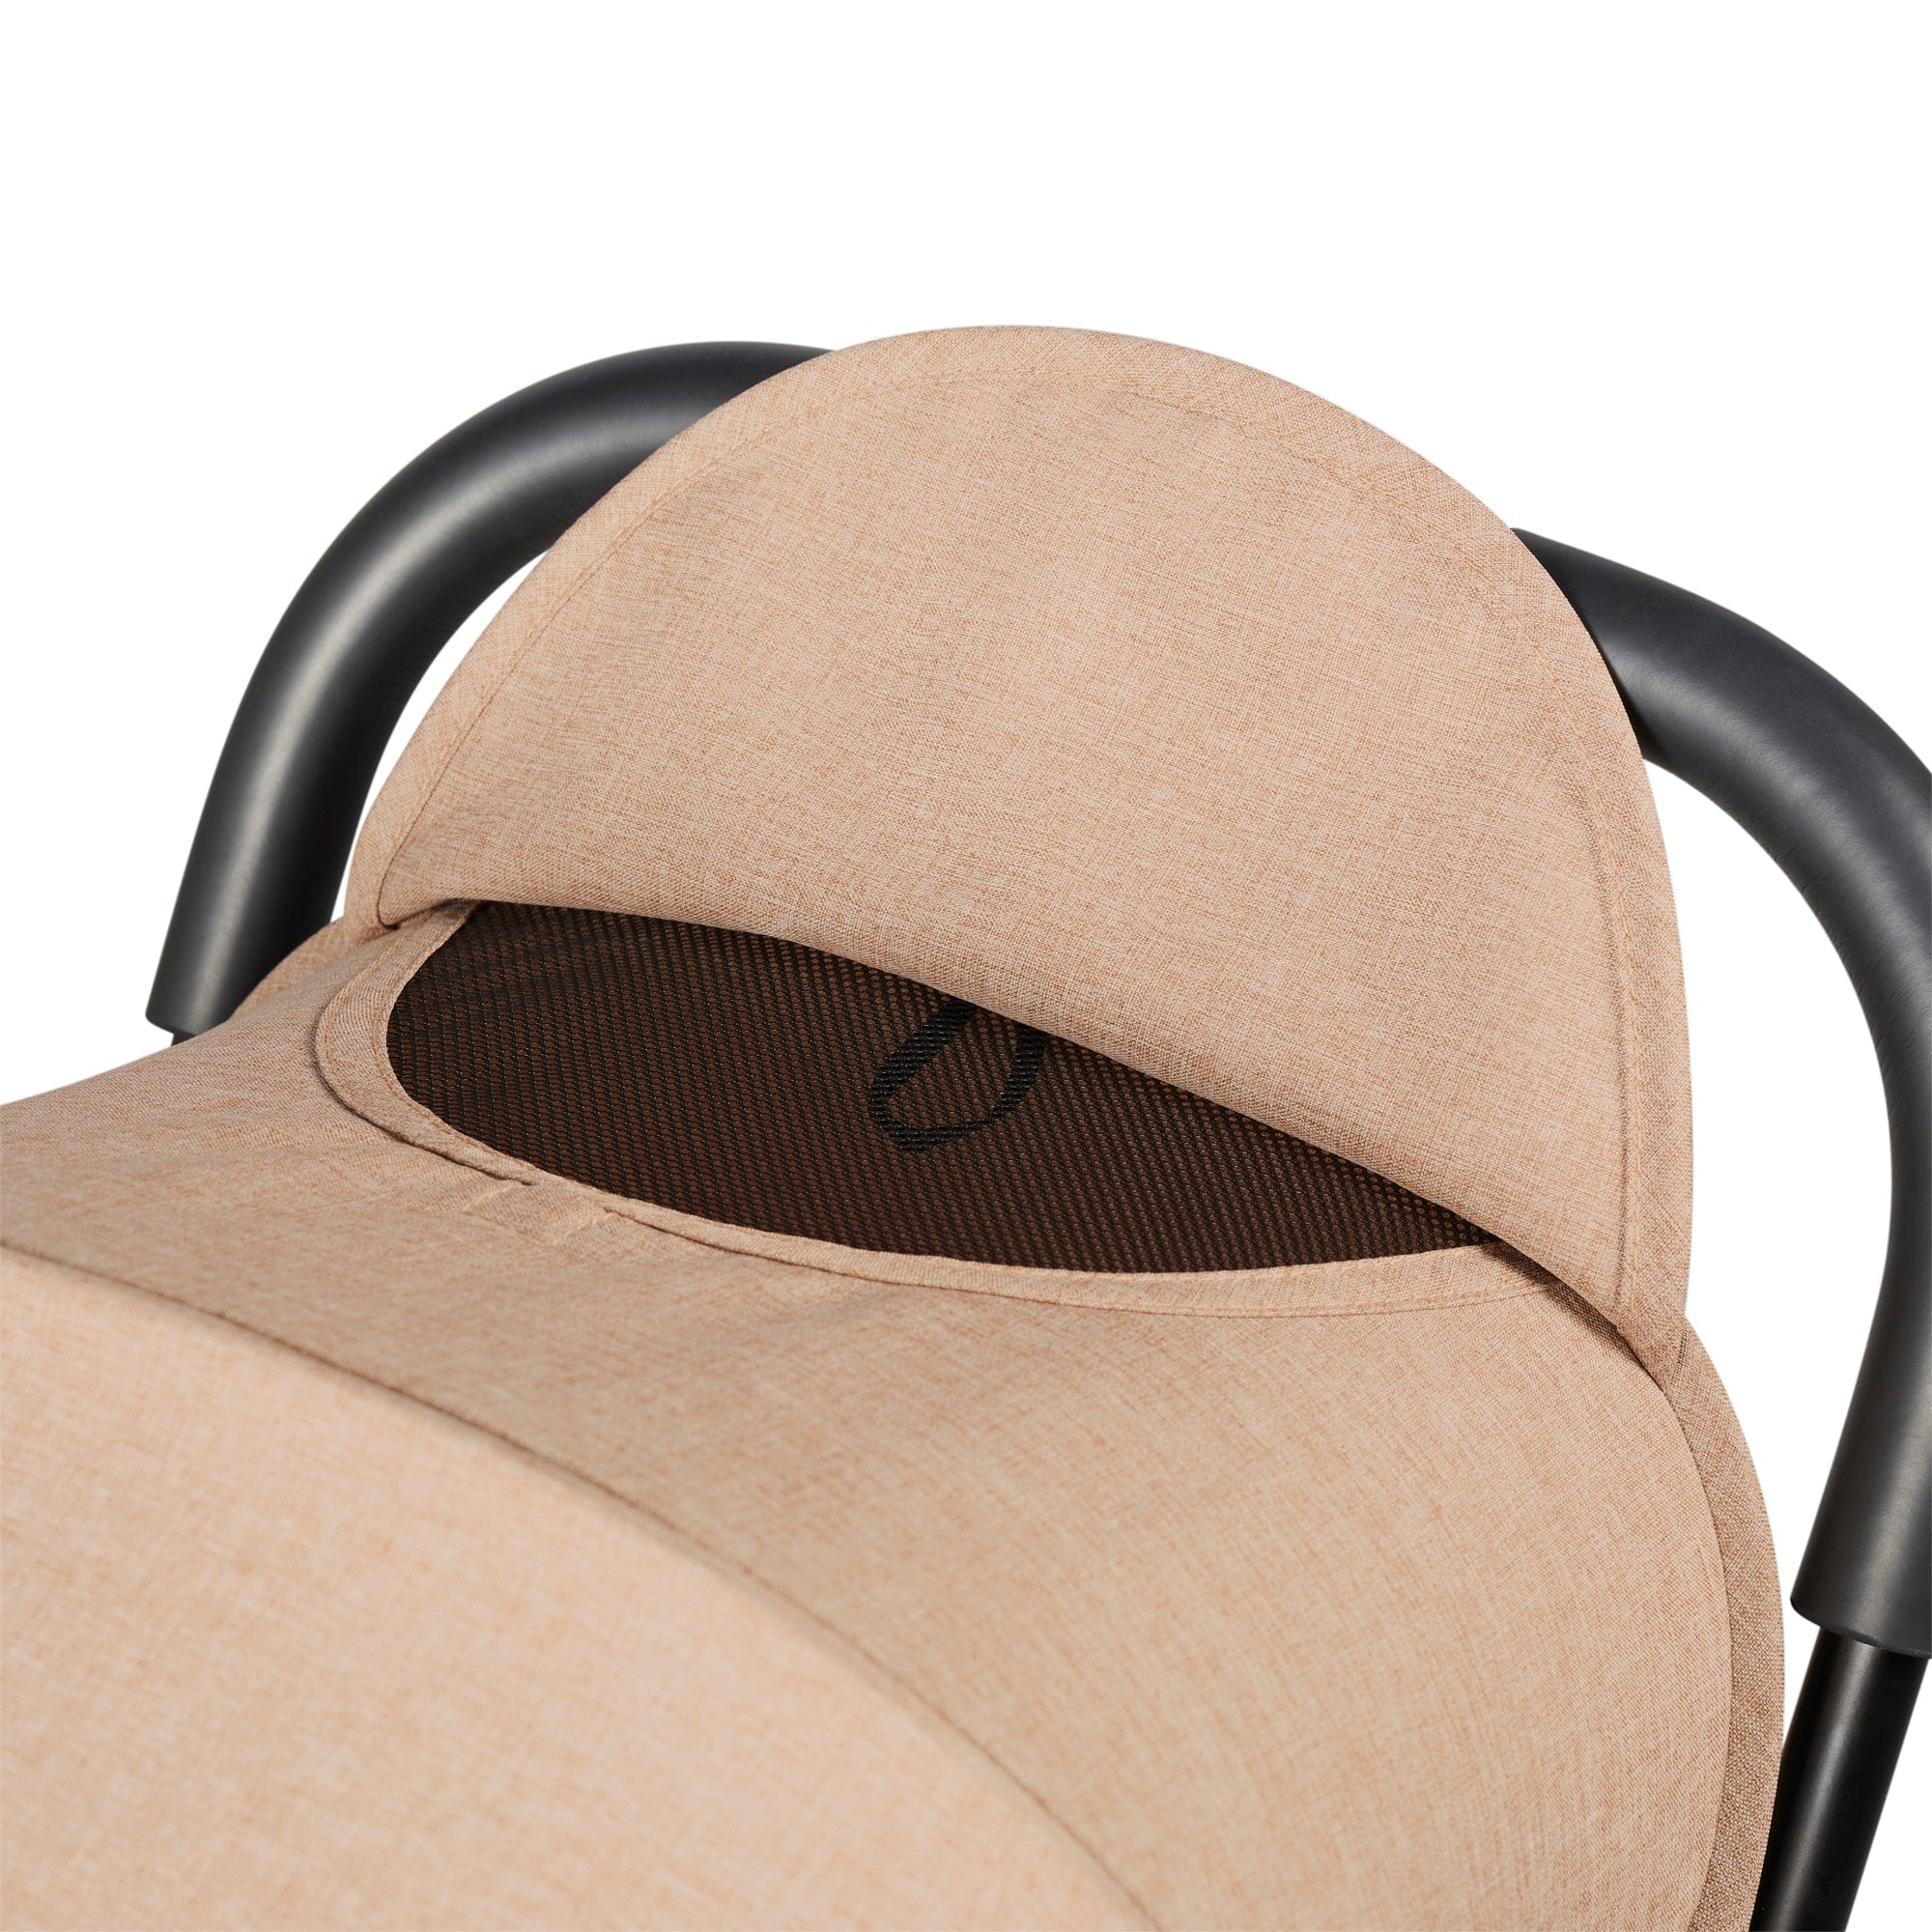 Ickle Bubba baby pushchairs Ickle Bubba Aries Max Autofold Stroller - Biscuit 15-005-200-157